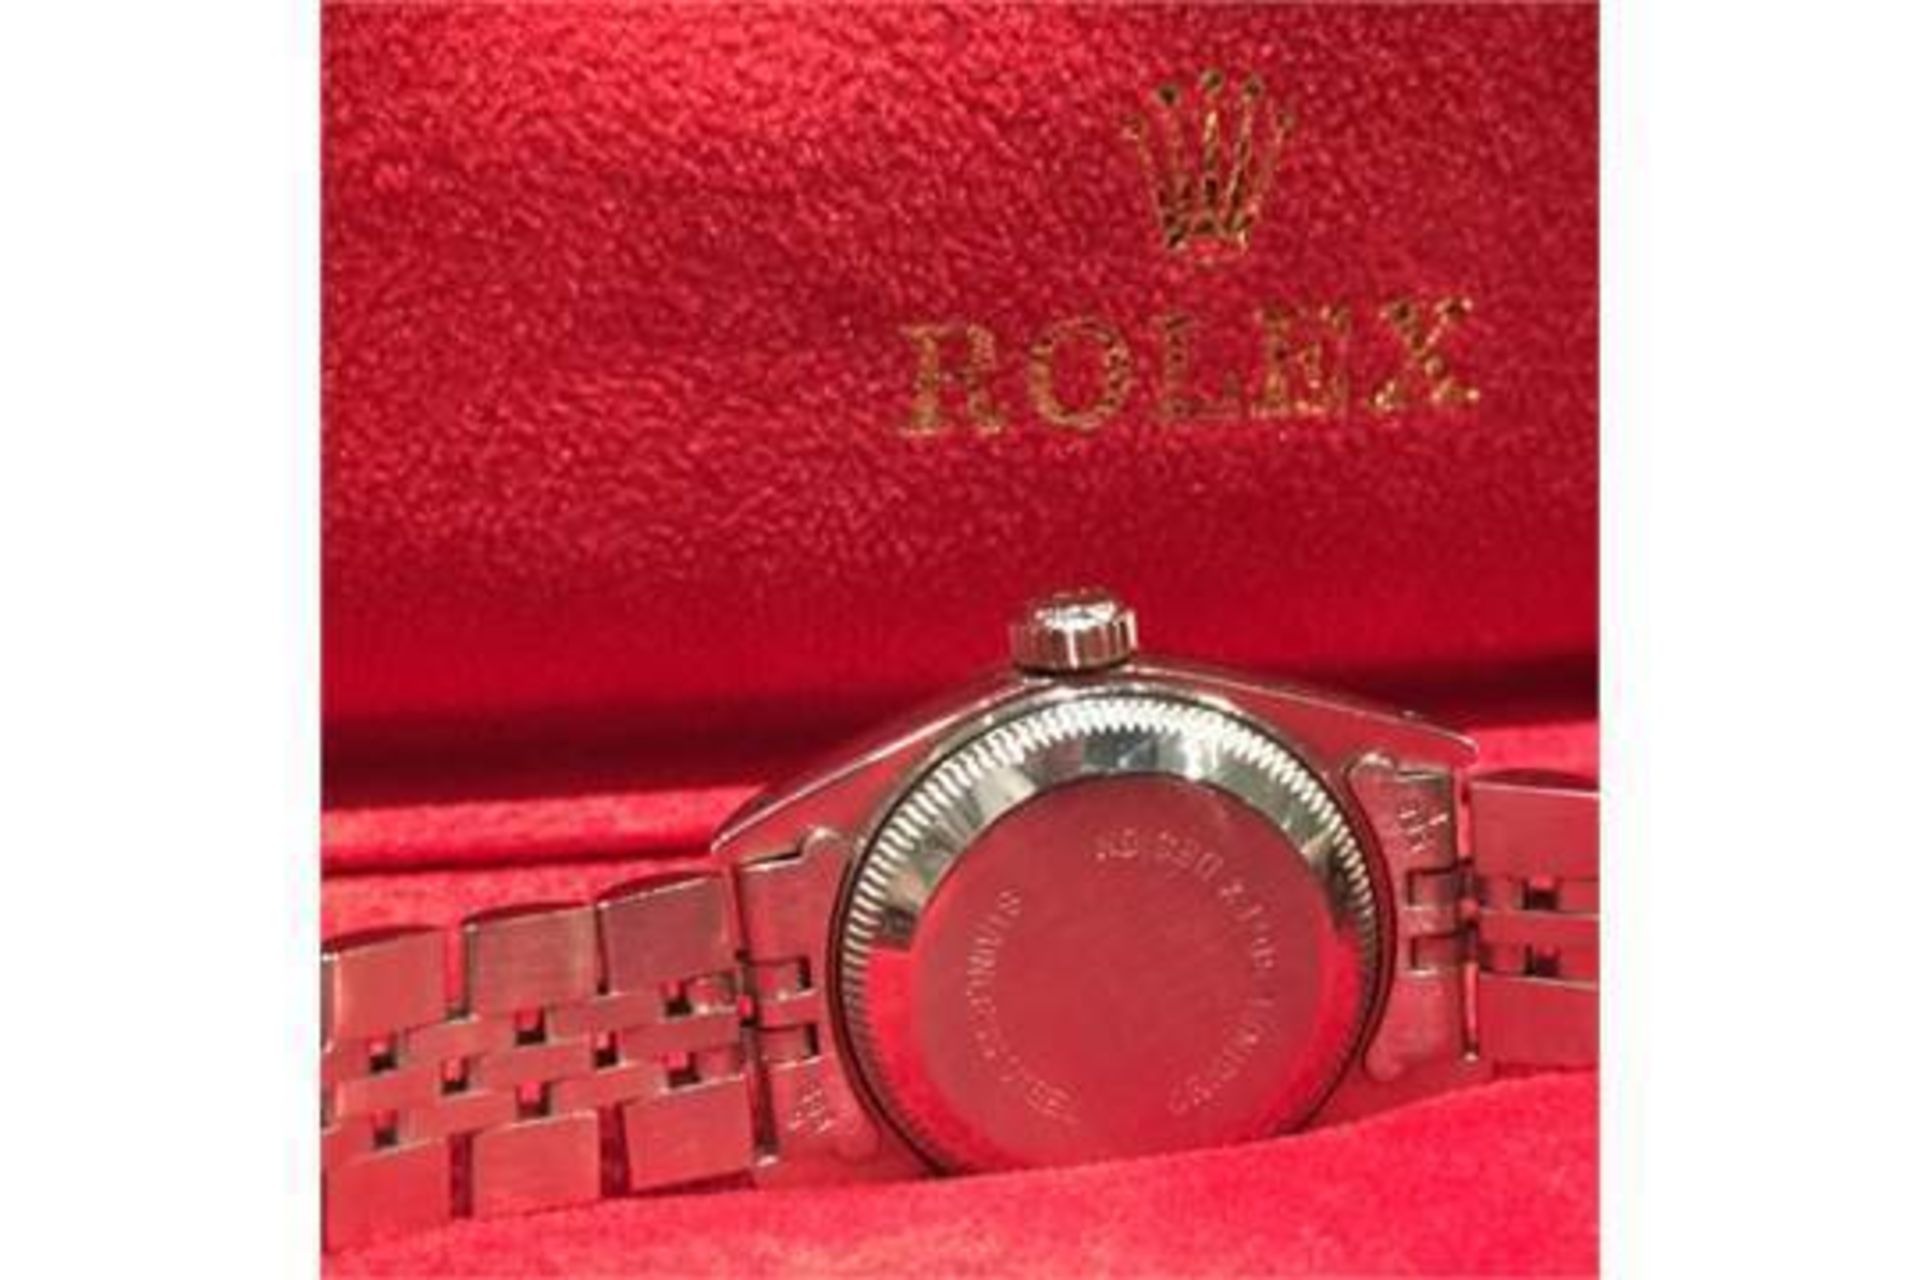 LADIES ROLEX STAINLESS STEEL DATEJUST, FULL STAINLESS STEEL STRAP, DIAL AND CASE, FULLY WORKING - Image 2 of 5